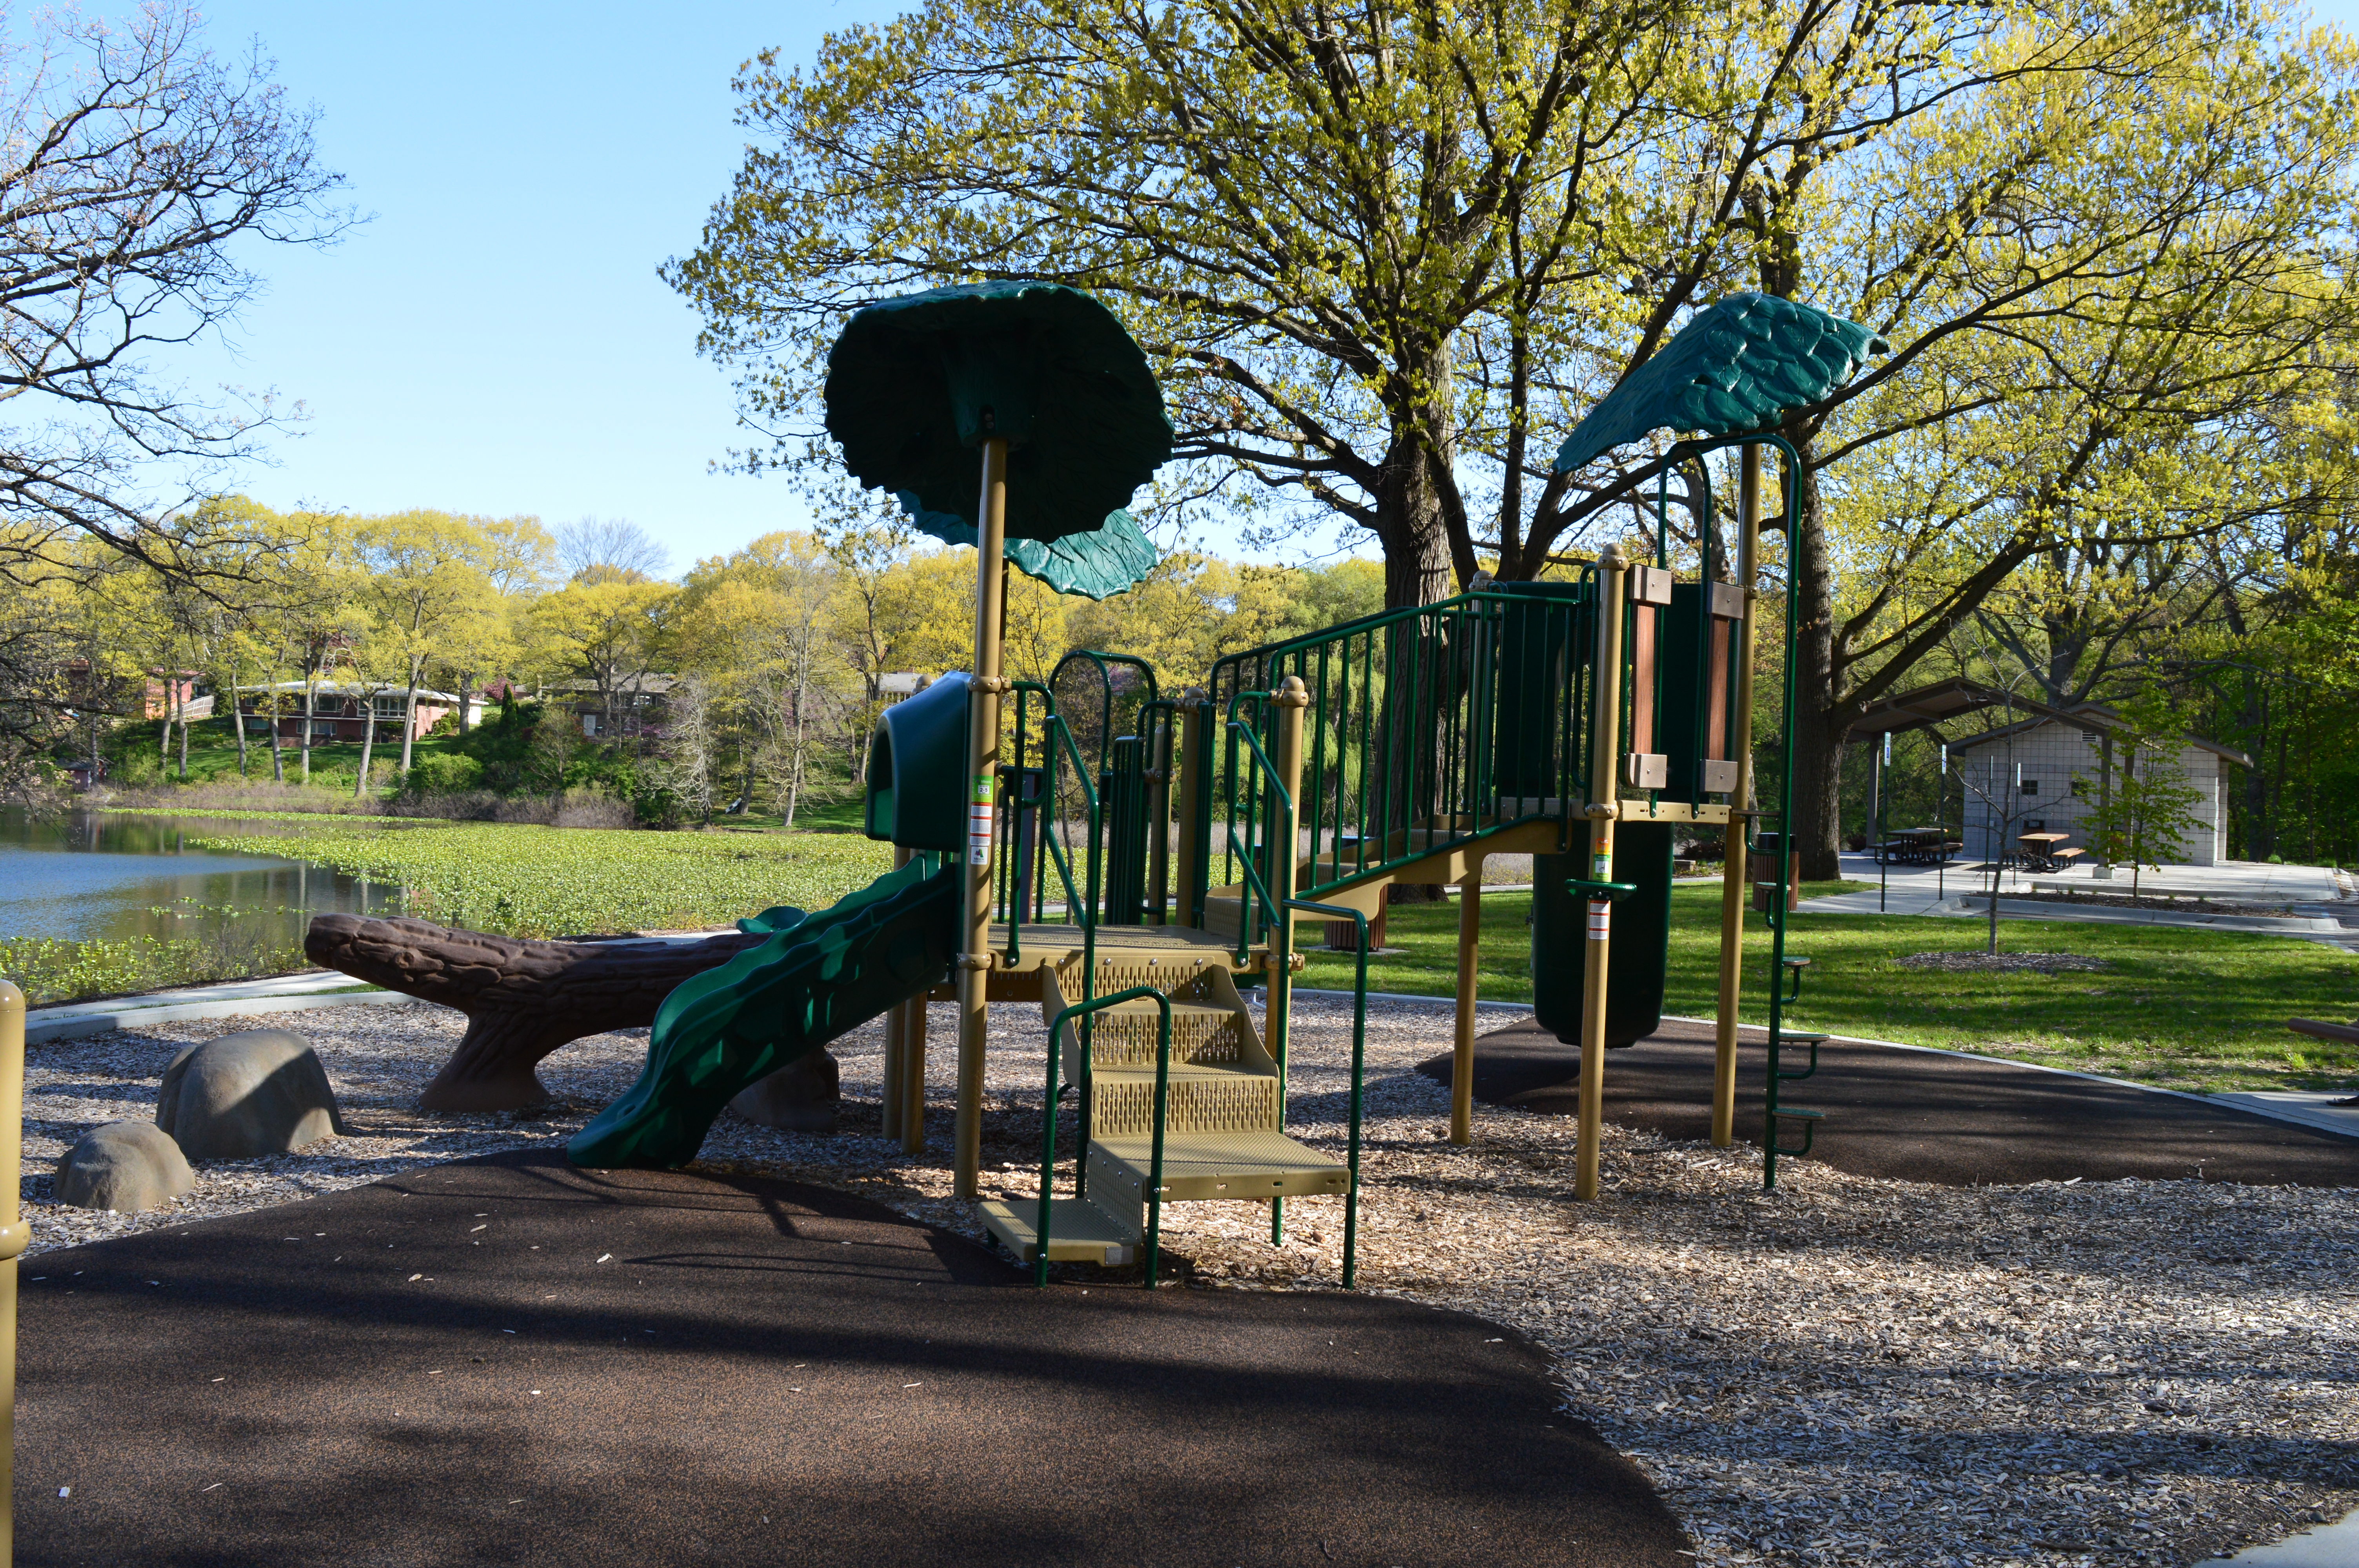 33 Parks to Explore and Enjoy! | Kzoo Parks and Recreation